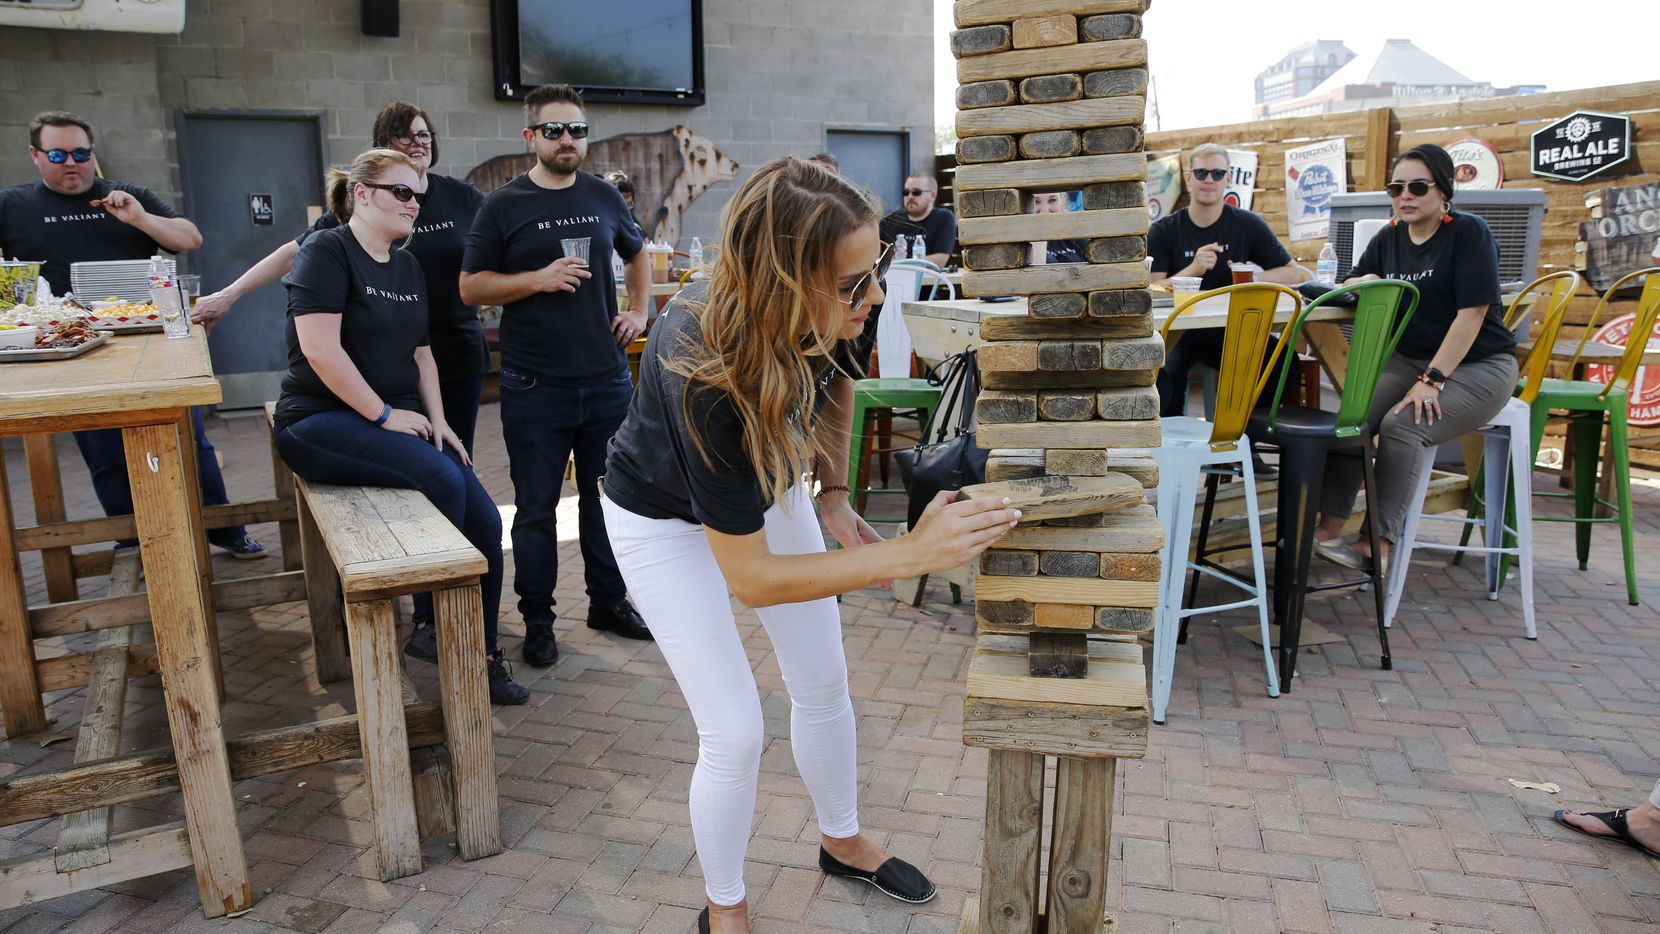 Emily Schroeder carefully removed a block of wood as she competed in a game of Jenga during an employee appreciation event for Valiant Residential employees.